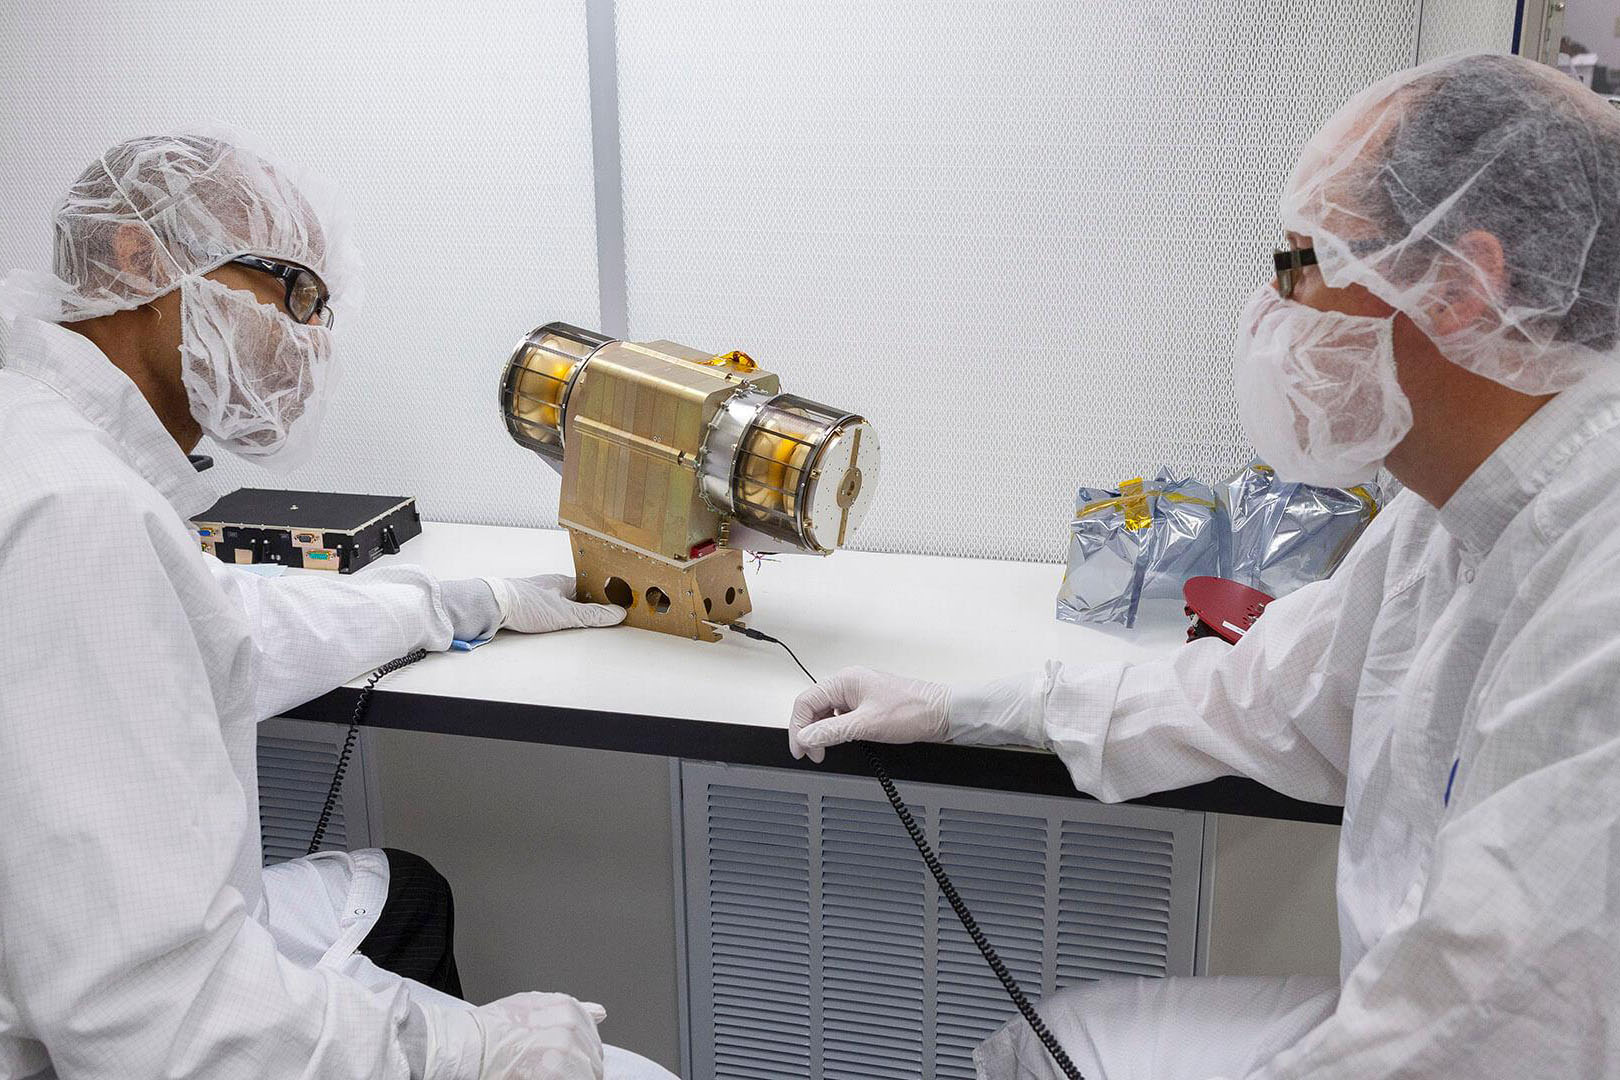 Two scientists in white lab coats observing a metallic gold space instrument